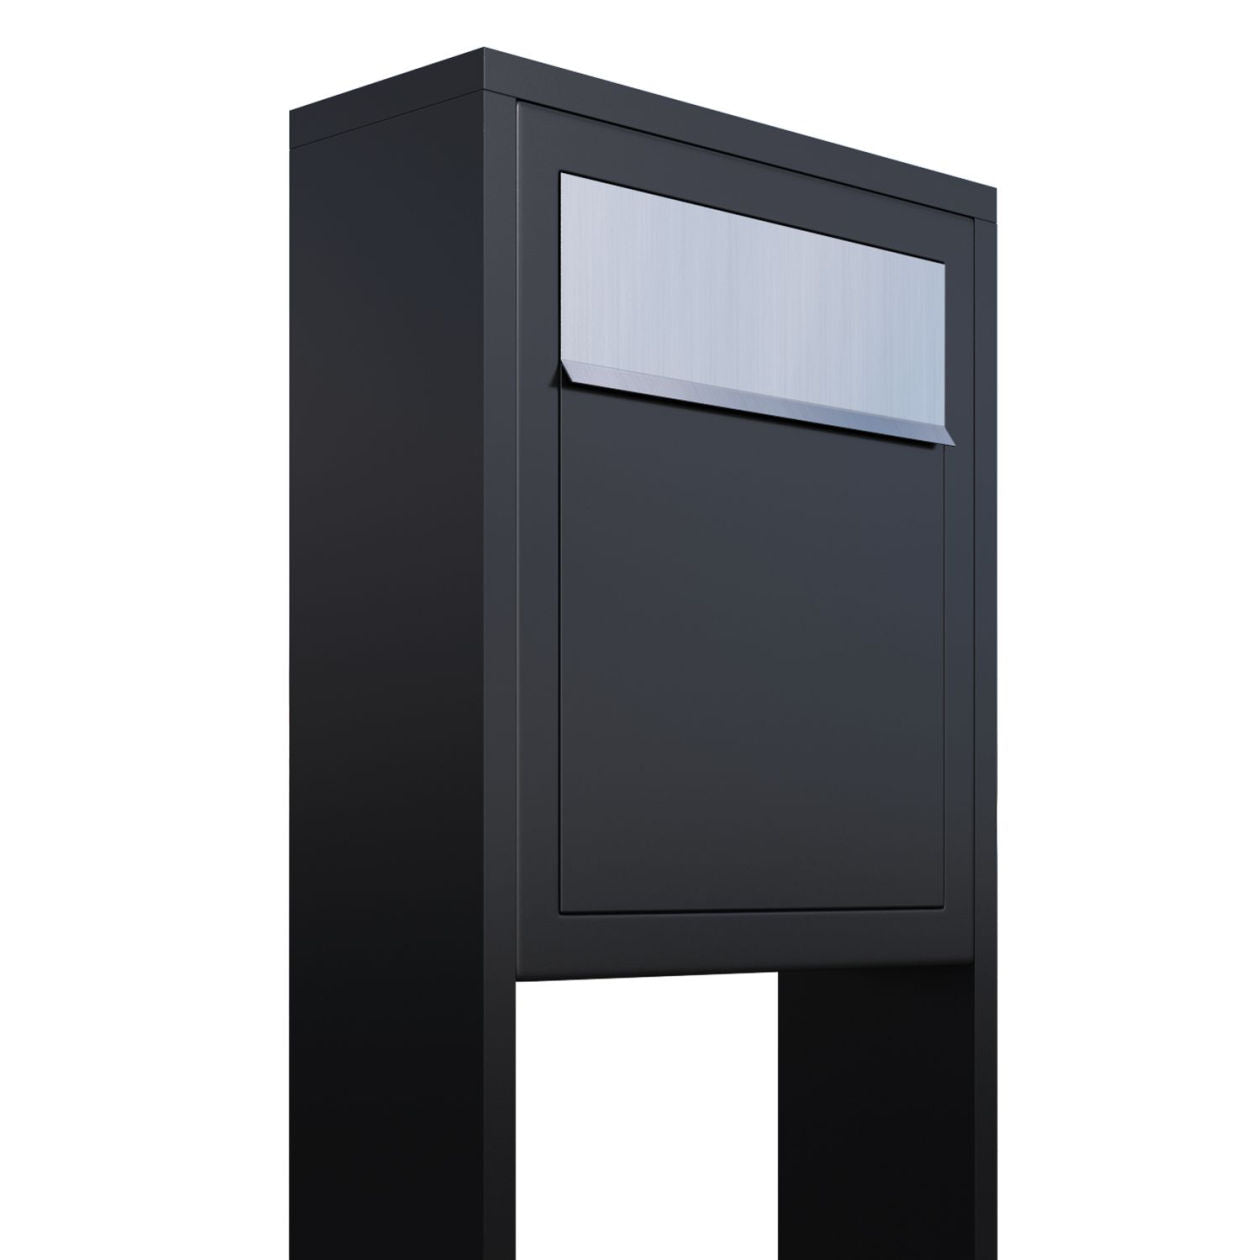 PROFILE 1 Standalone - Post-mounted locking mailbox in black with stainless steel flap